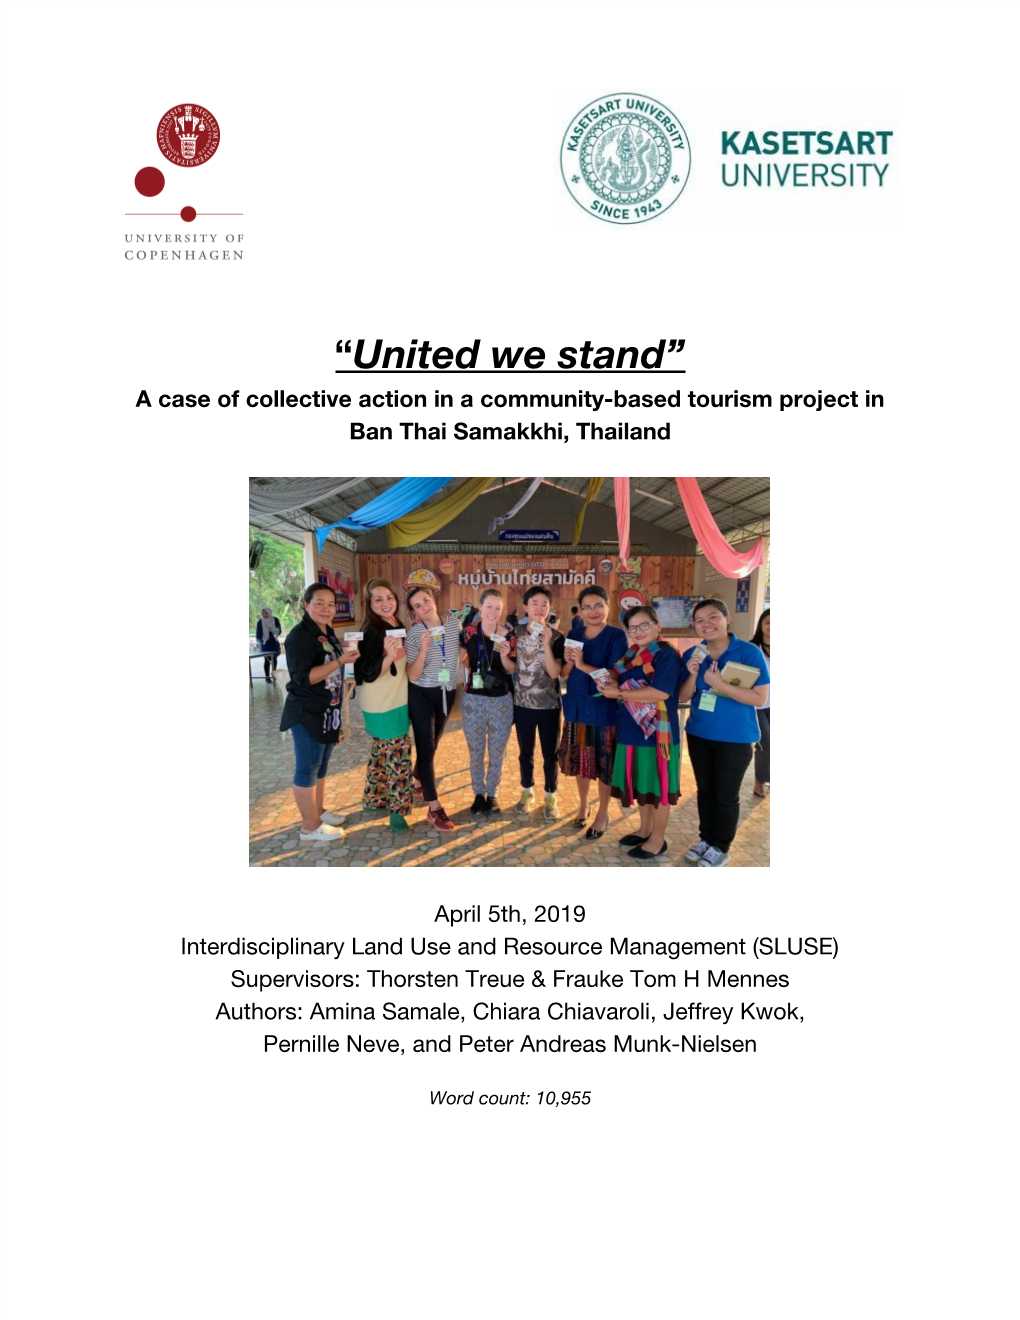 United We Stand” ​ a Case of Collective Action in a Community-Based Tourism Project in Ban Thai Samakkhi, Thailand